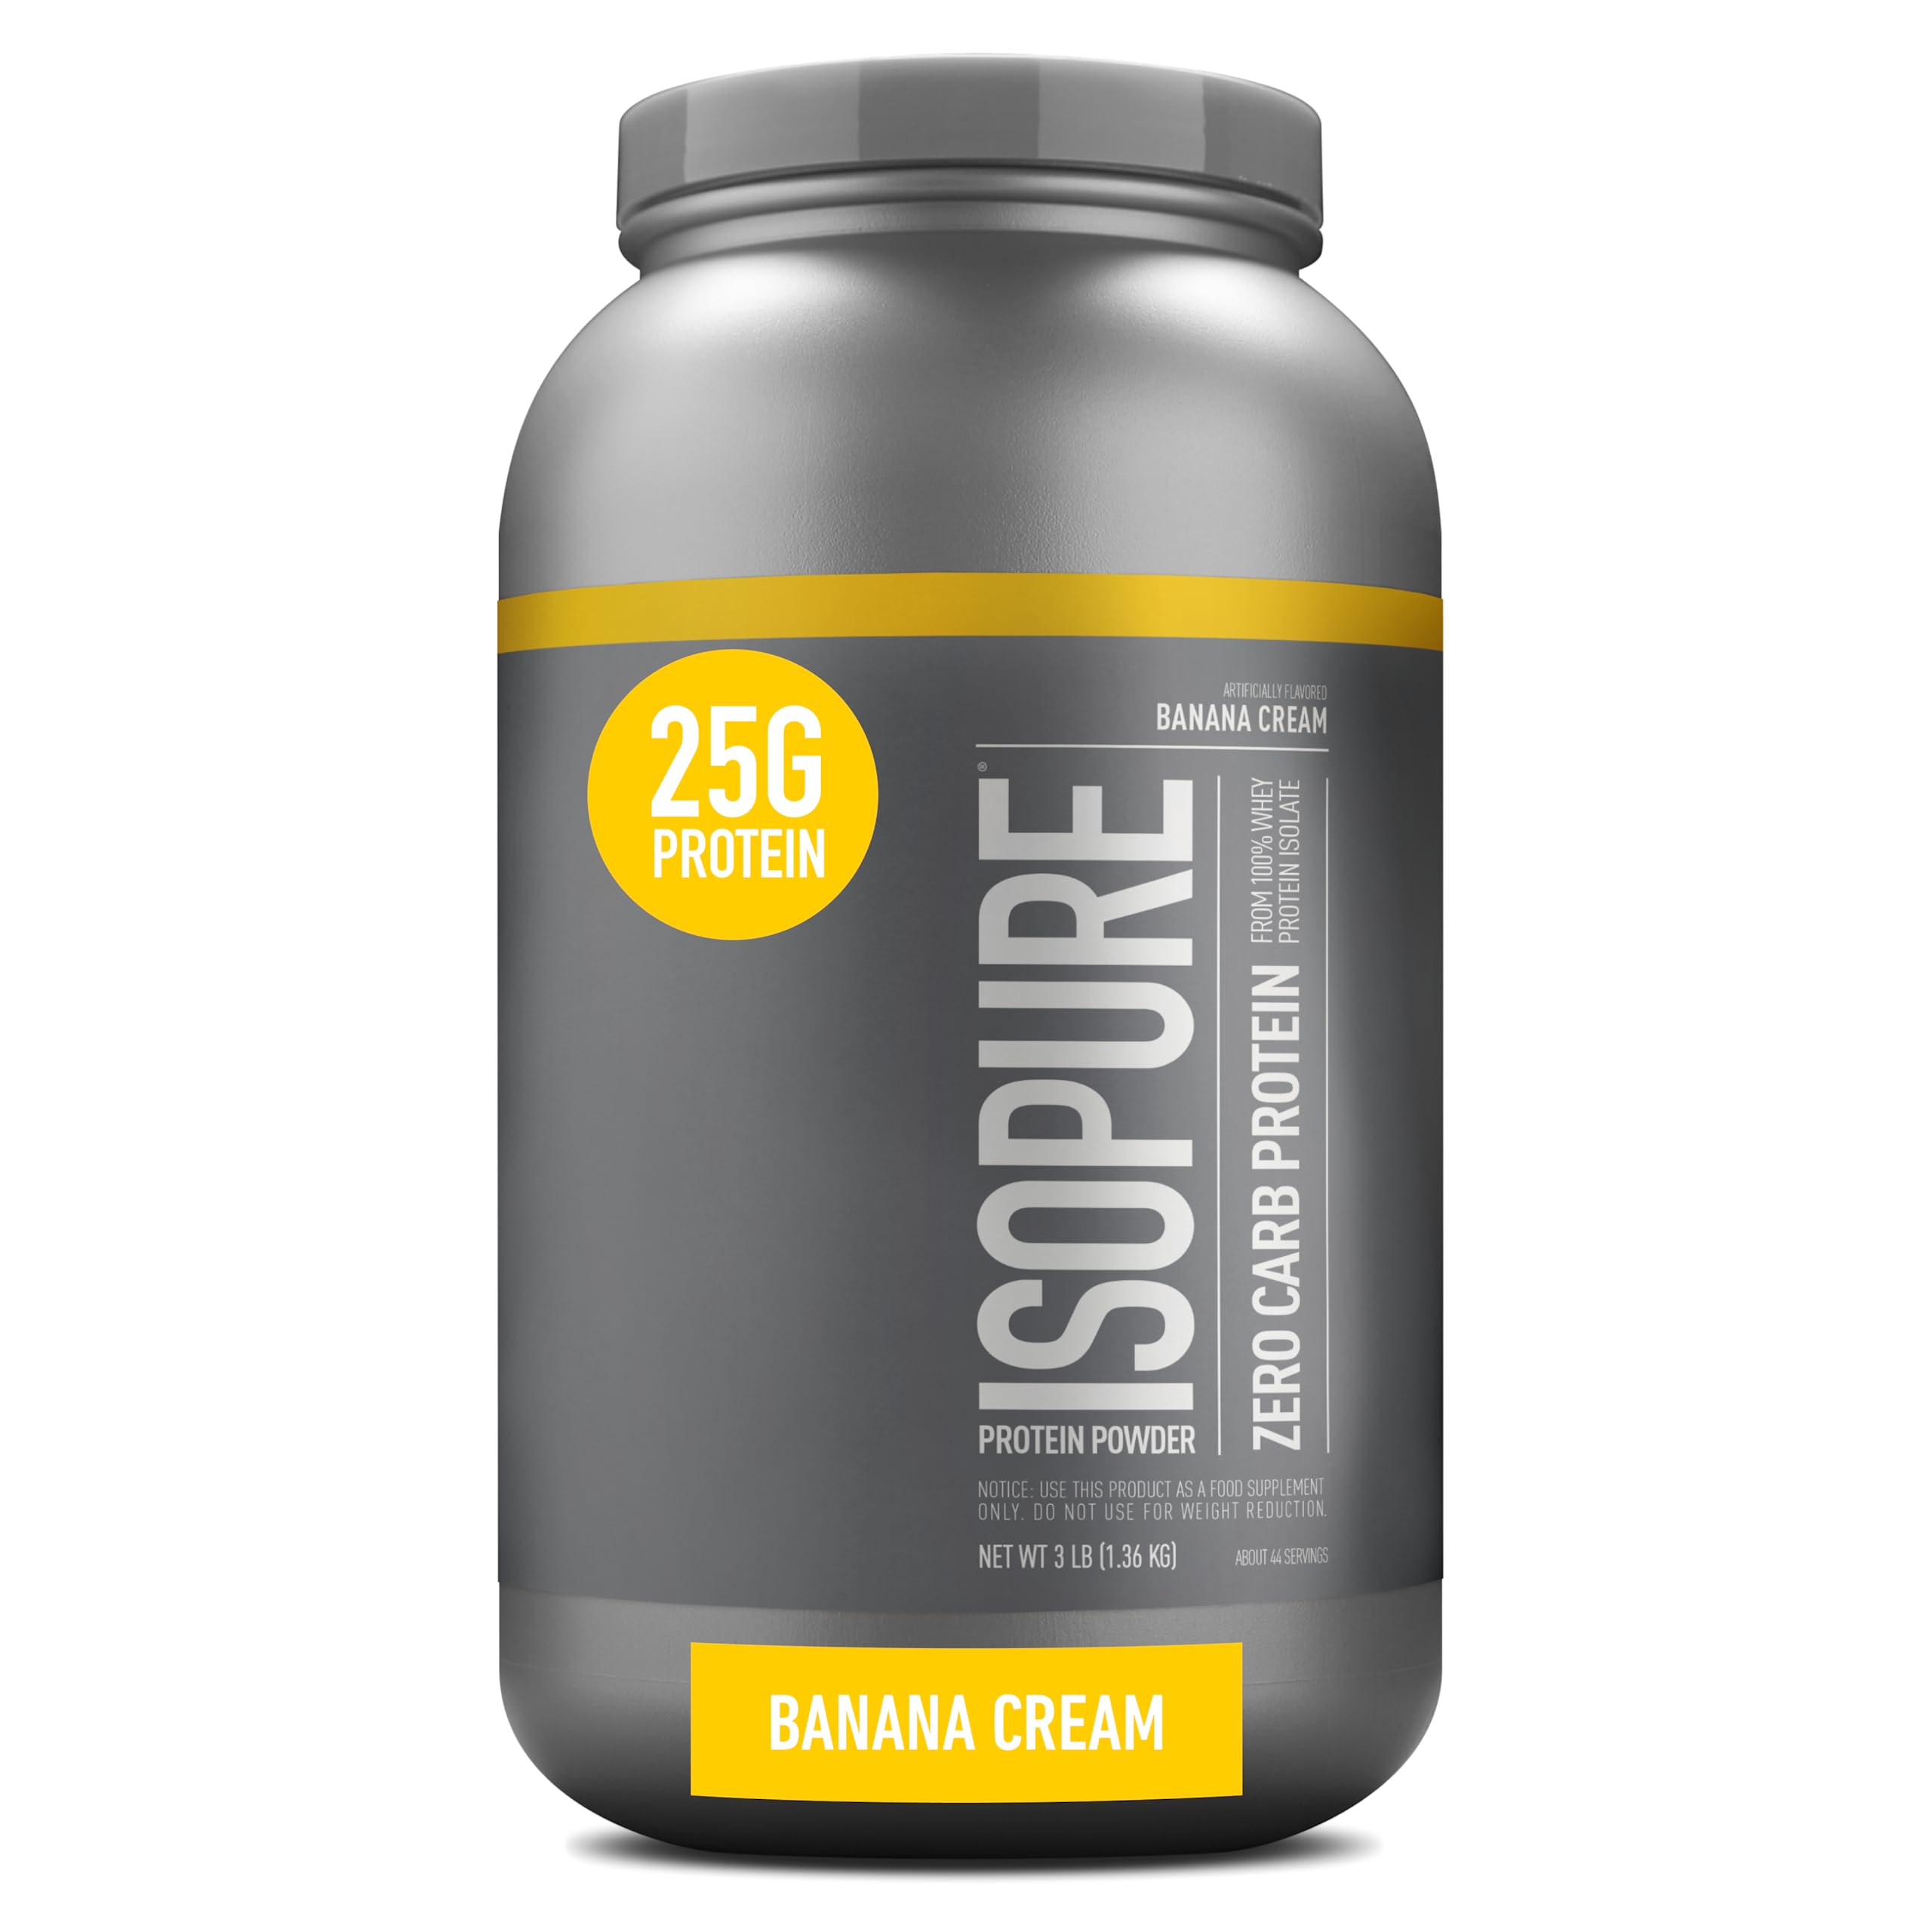 Isopure Protein Powder, Zero Carb Whey Isolate with Vitamin C & Zinc for Immune Support, 25g Protein, Keto Friendly, Banana Cream, 44 Servings, 3 Pounds (Packaging May Vary)